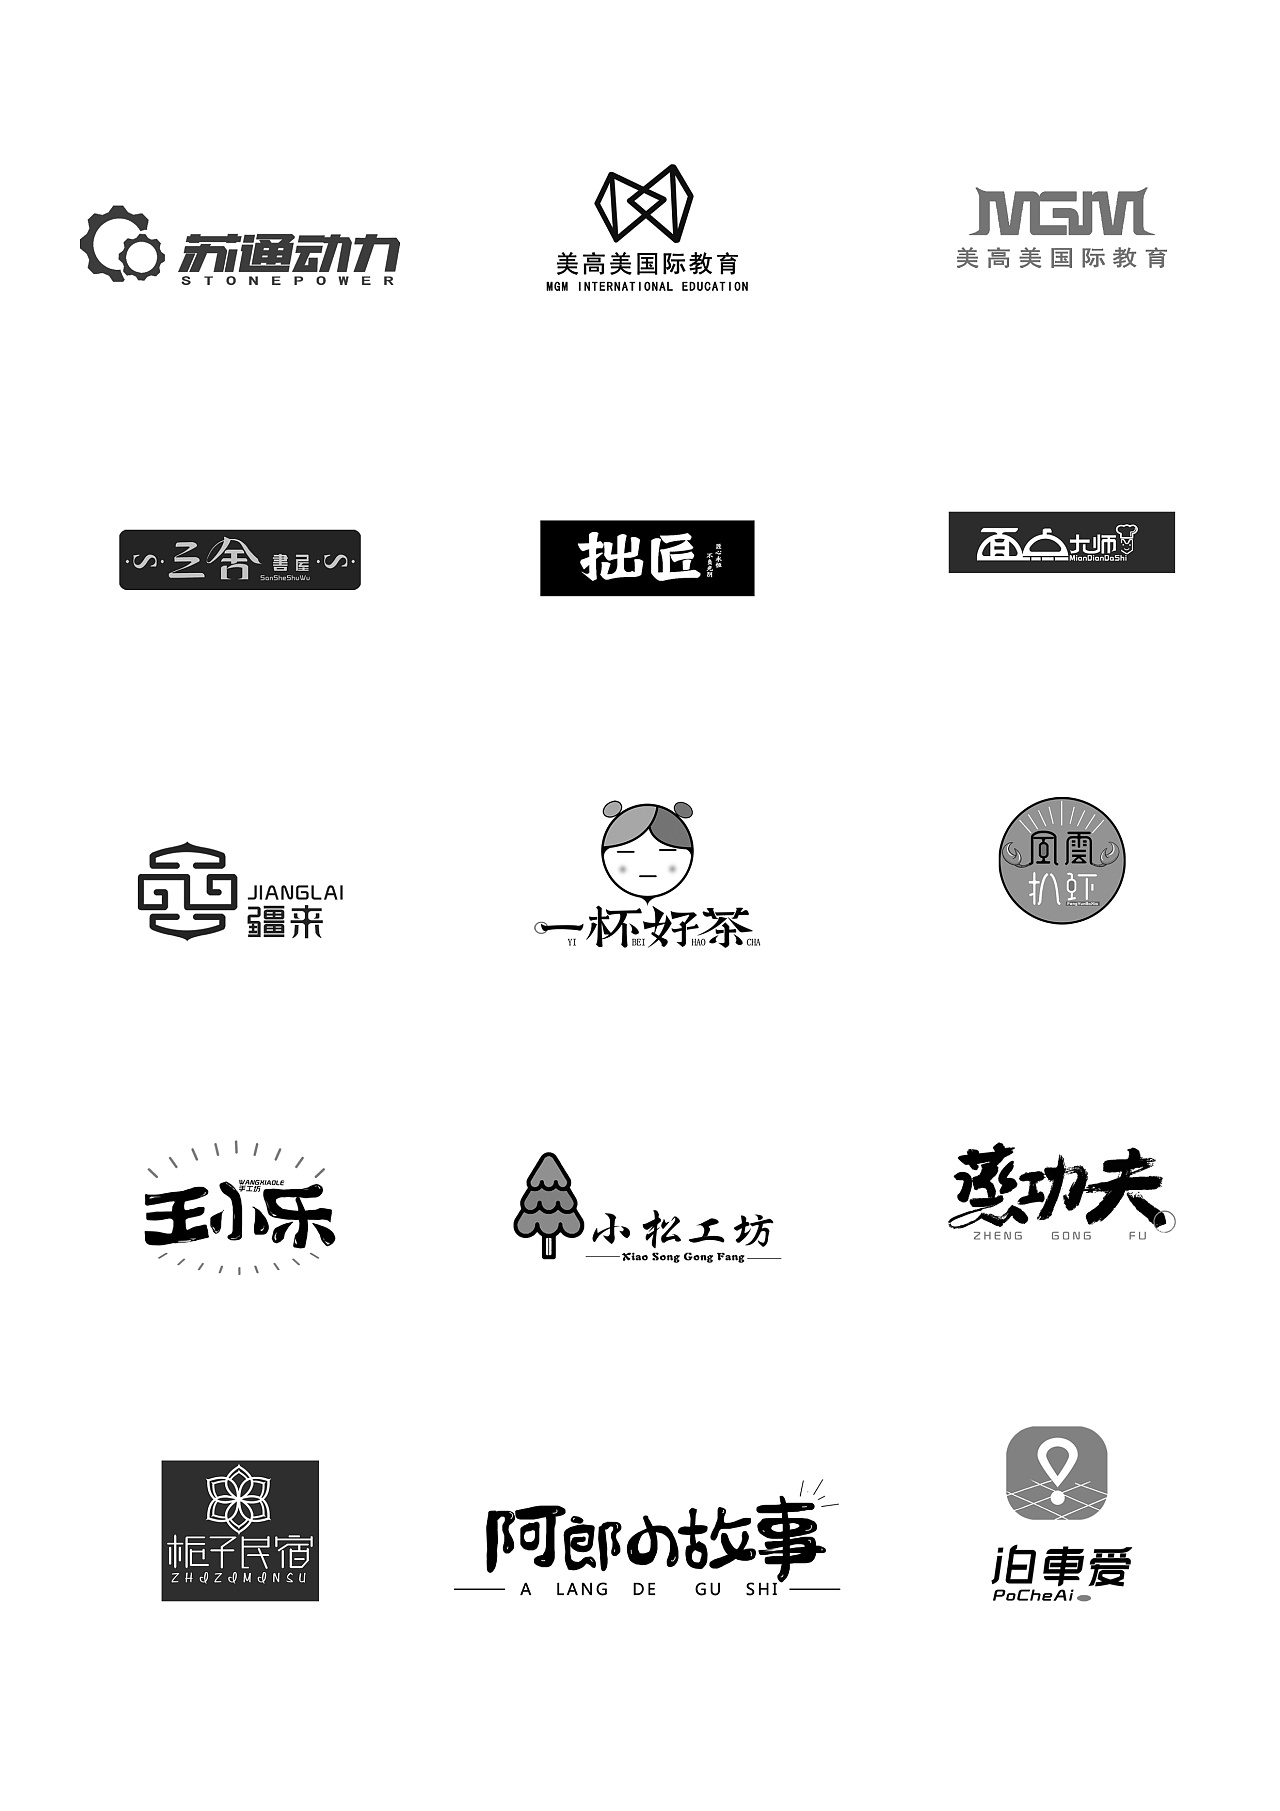 Great Chinese fonts and logo scheme design